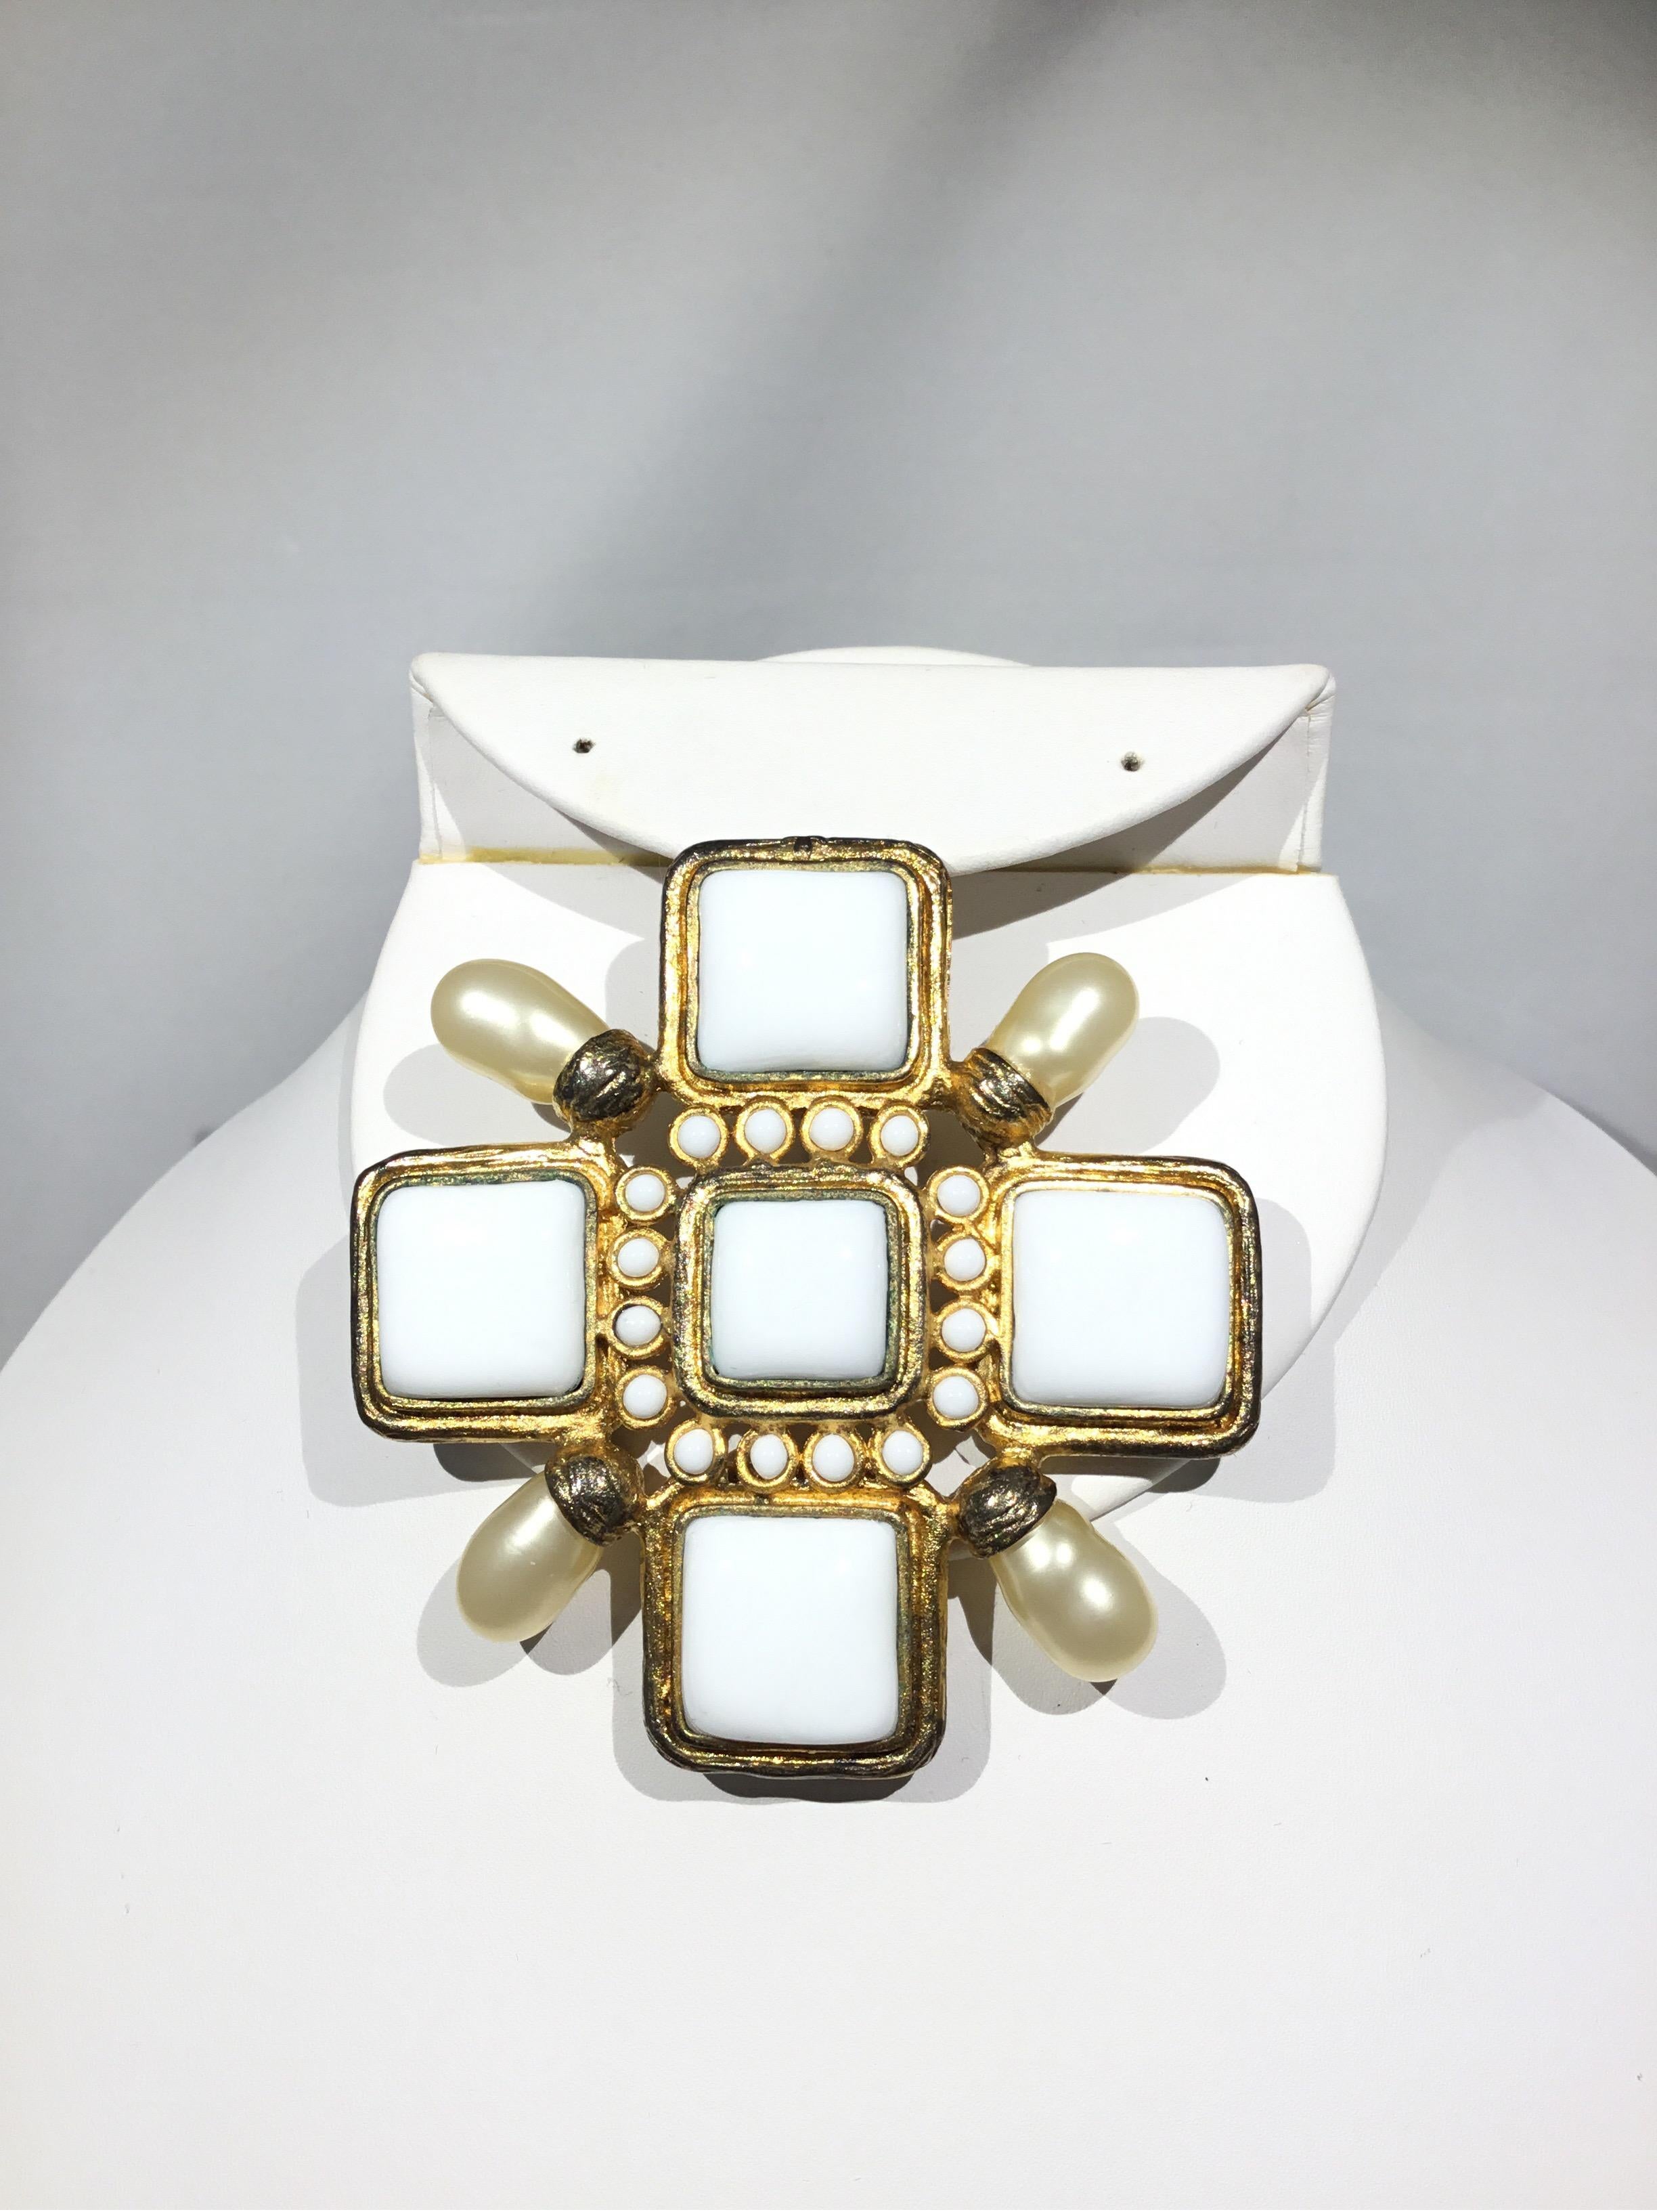 Chanel White Enamel and pearl brooch on a gold tone metal from Chanel’s 2001 Spring collection. Brooch also has a hook feature in which makes it wearable as a pendant for a necklace. Metal shows normal wears. 

Measurements: 3” x 3”,
Weight: 70.67